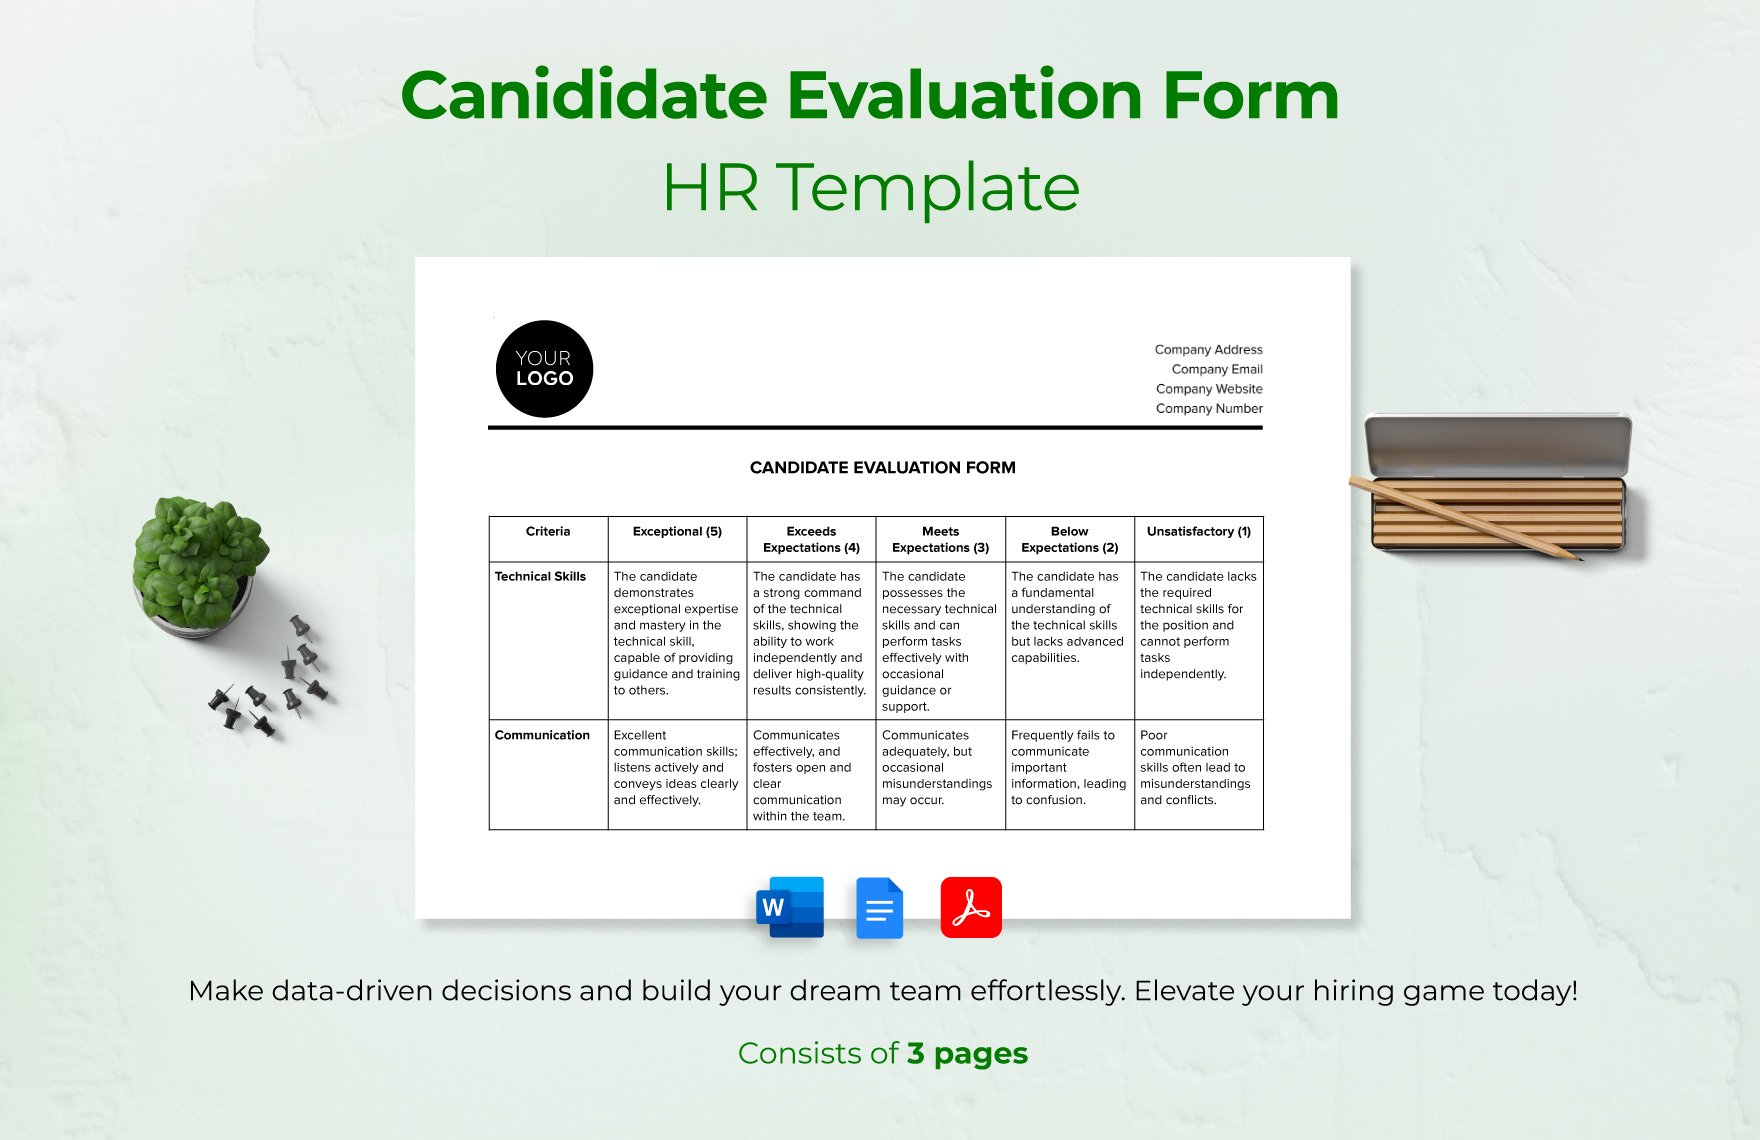 Candidate Evaluation Form HR Template in Word, Google Docs, PDF